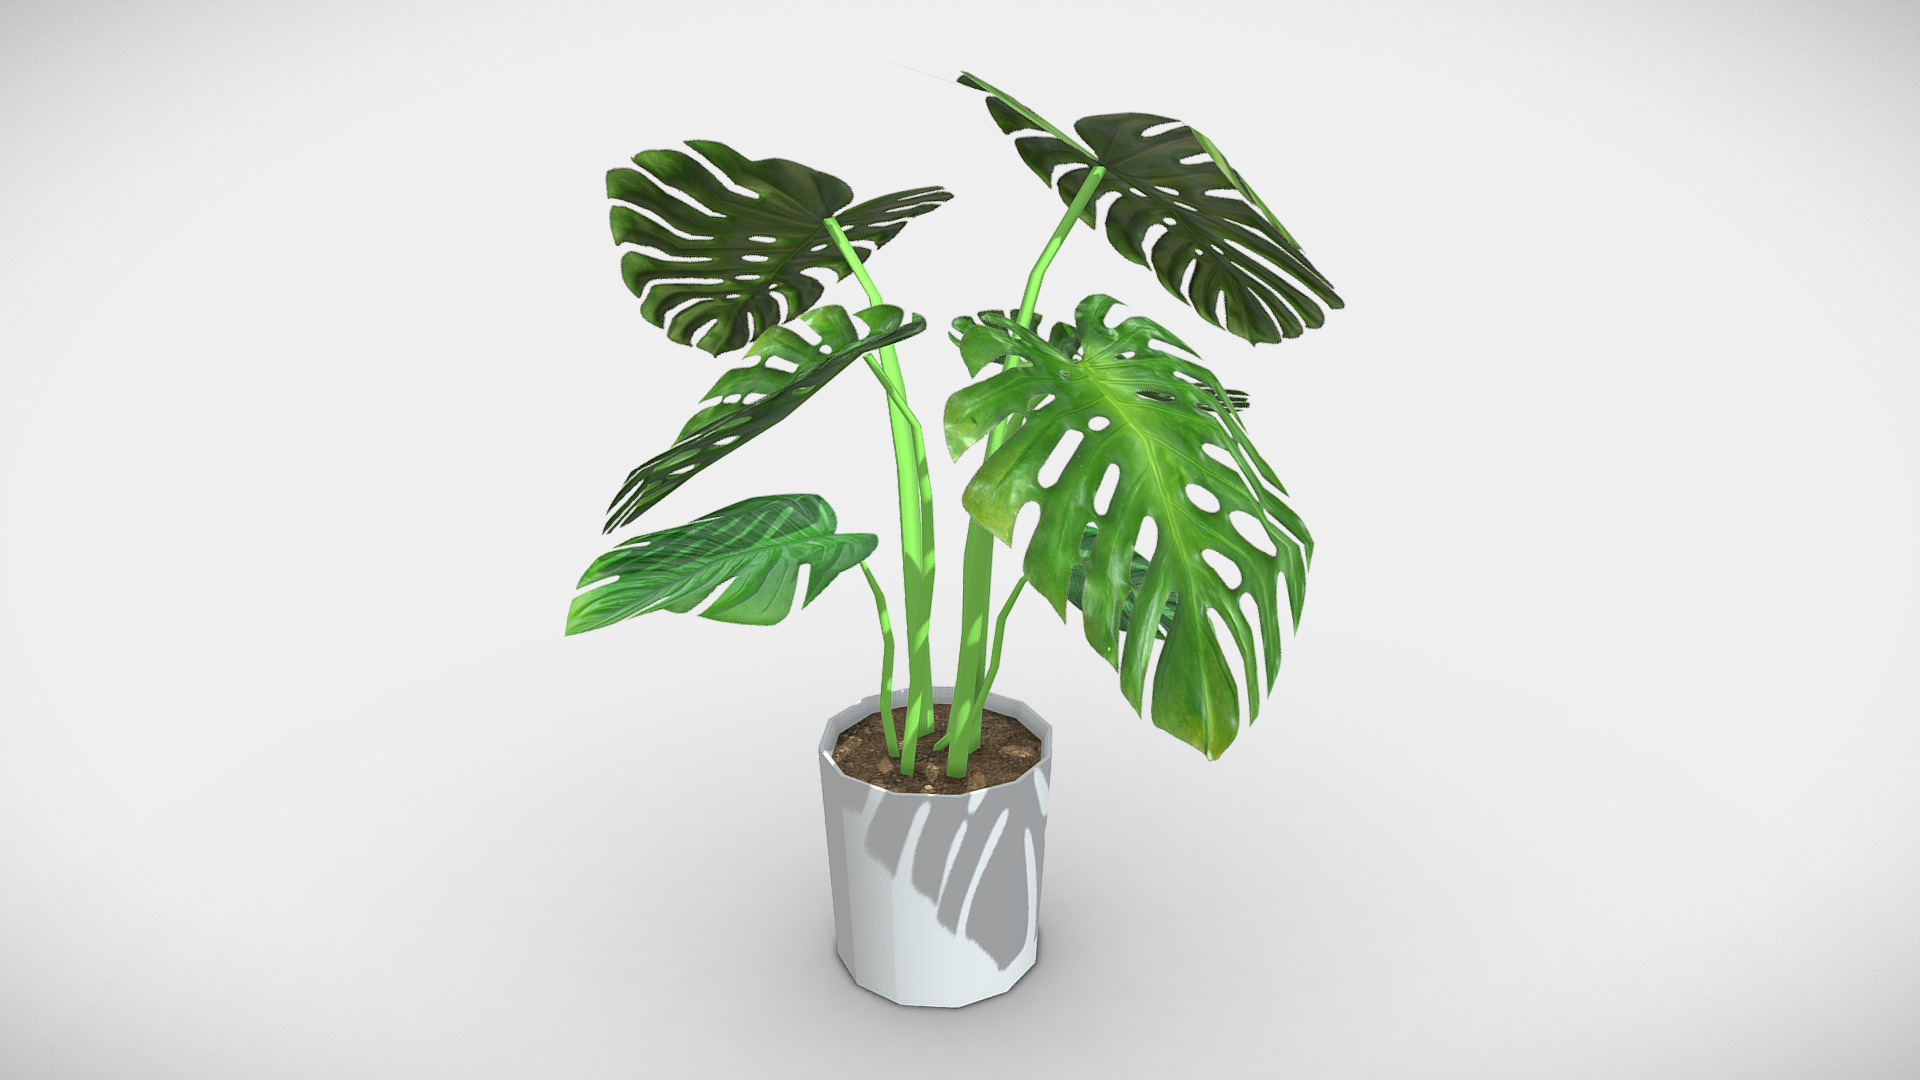 3D model Monstera deliciosa low poly - This is a 3D model of the Monstera deliciosa low poly. The 3D model is about a plant in a pot.